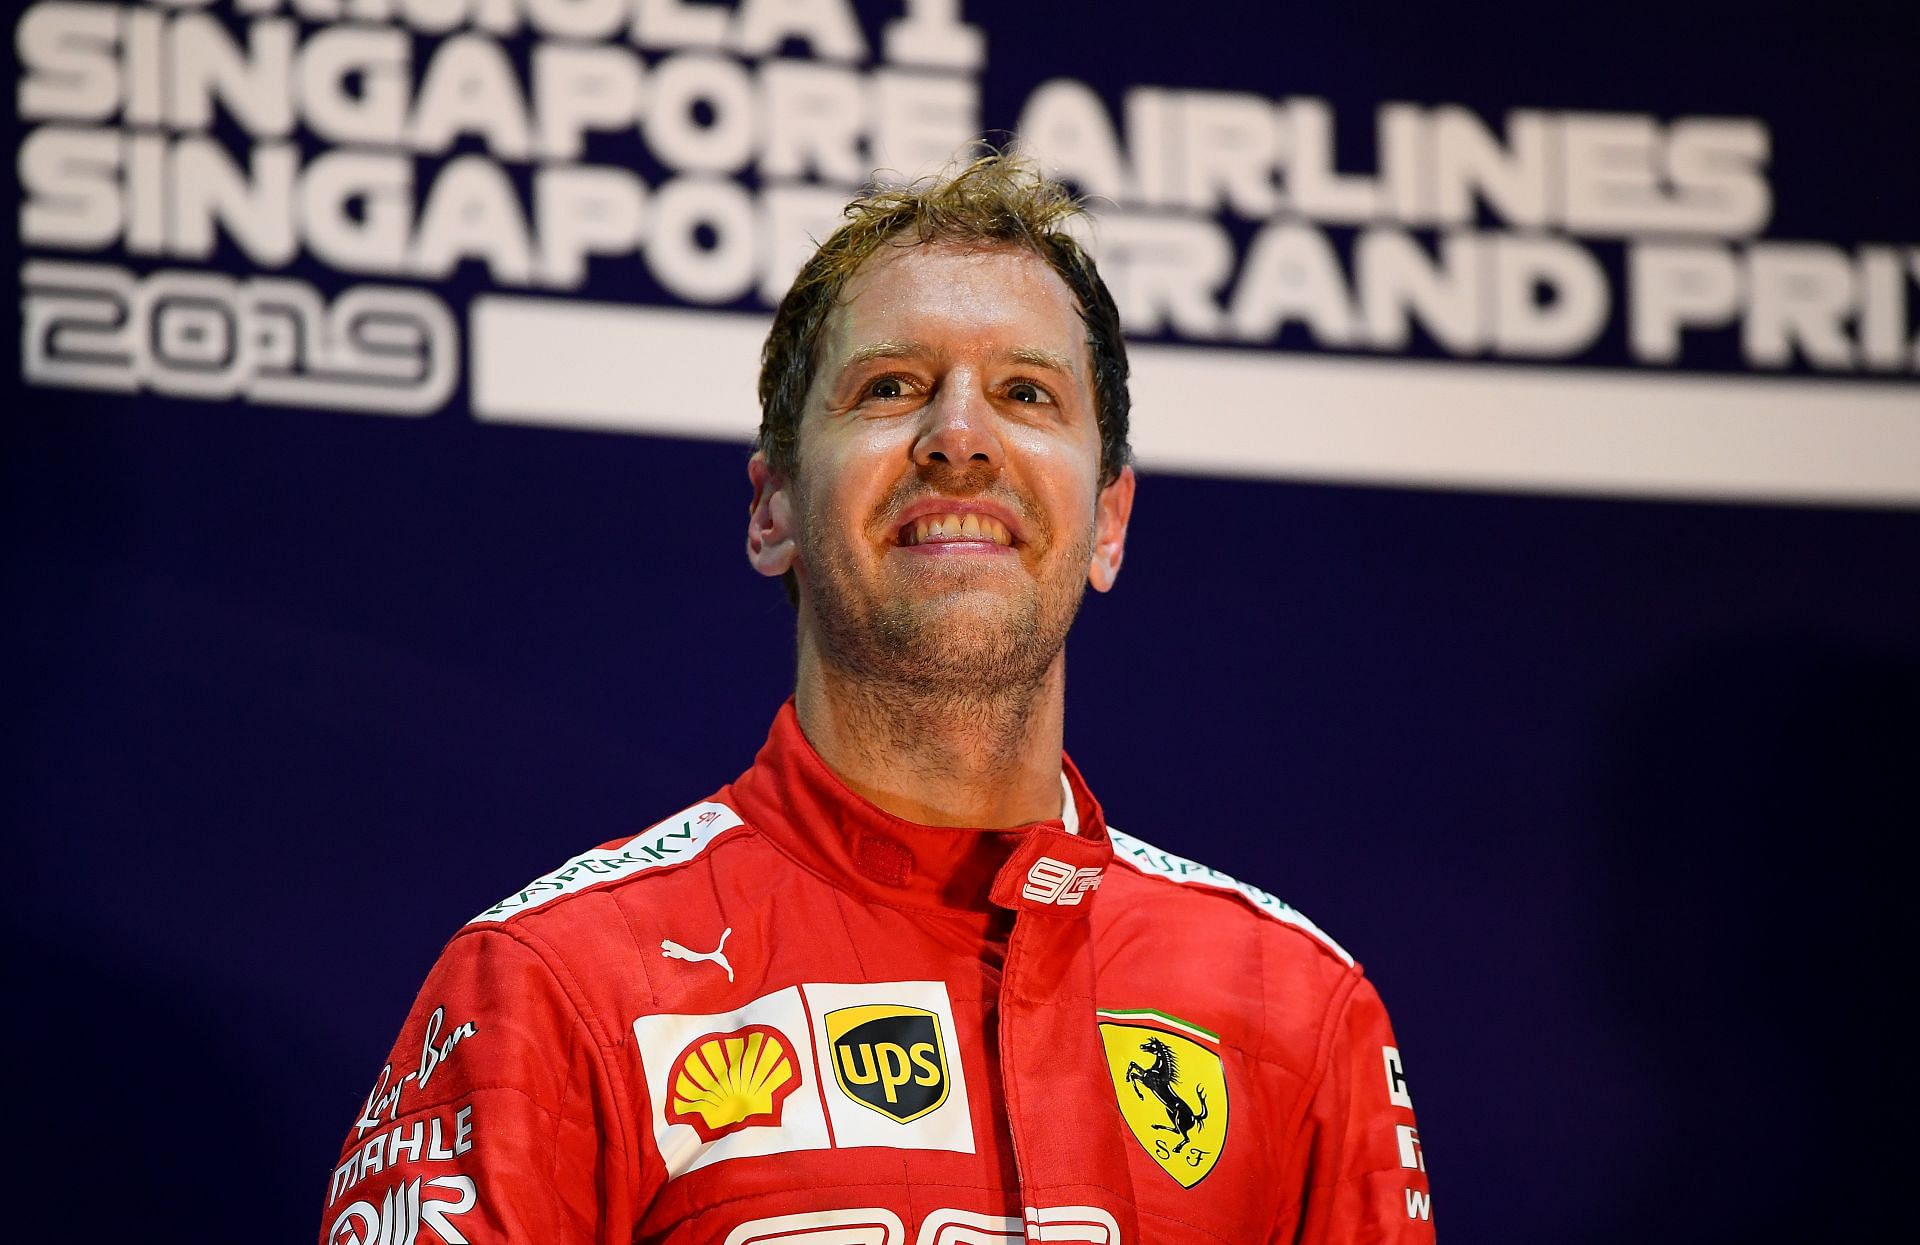 Sebastian Vettel could not achieve his goal of winning a title with Ferrari.